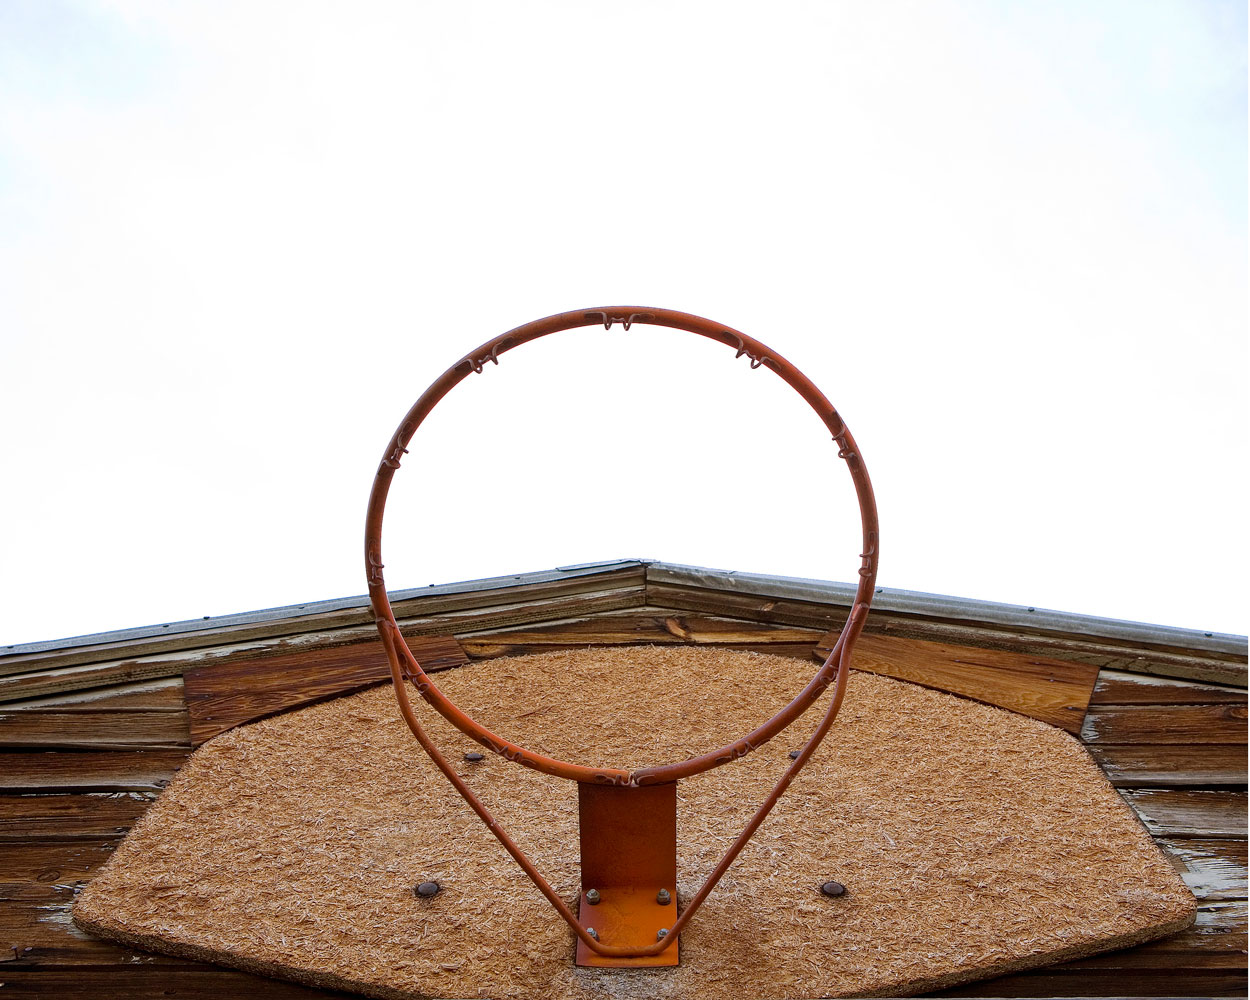  Title: 5100A-19617 (basketball hoop), Archival pigment print, 20x16", 2008 